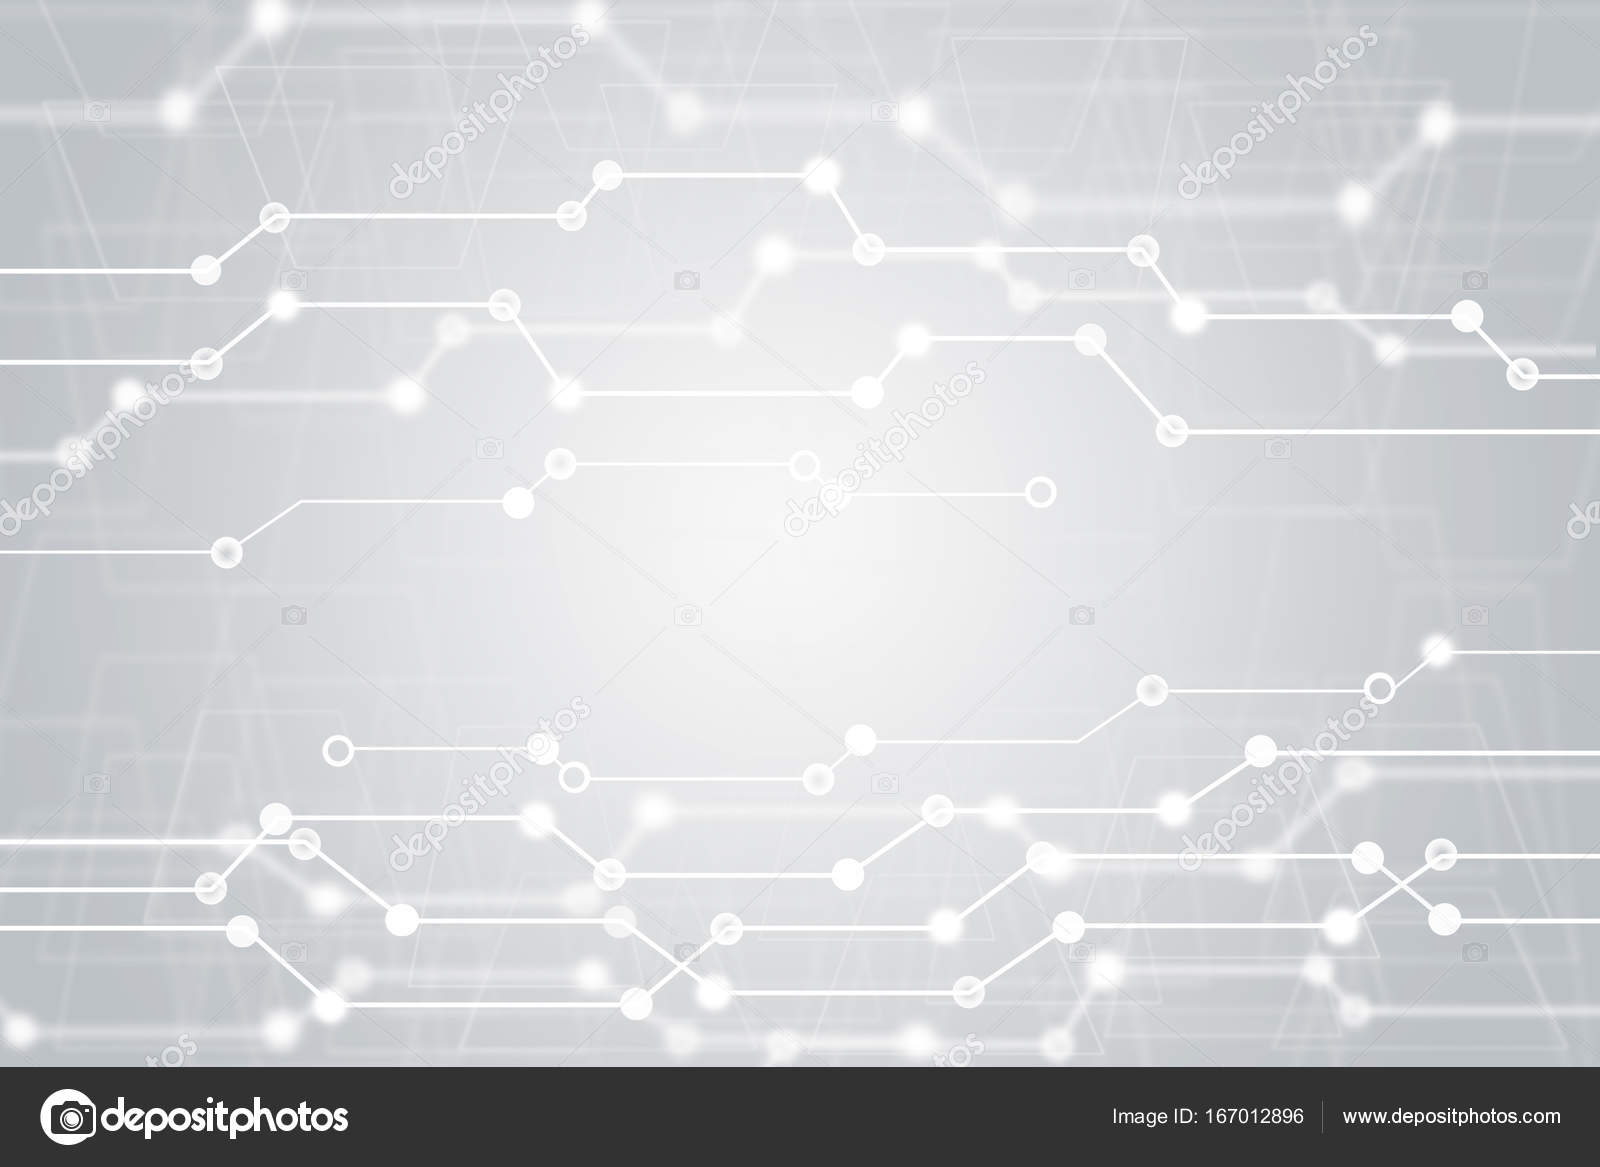 Abstract High Tech Background In White And Gray Tone Stock Photo by  ©VovanIvan 167012896